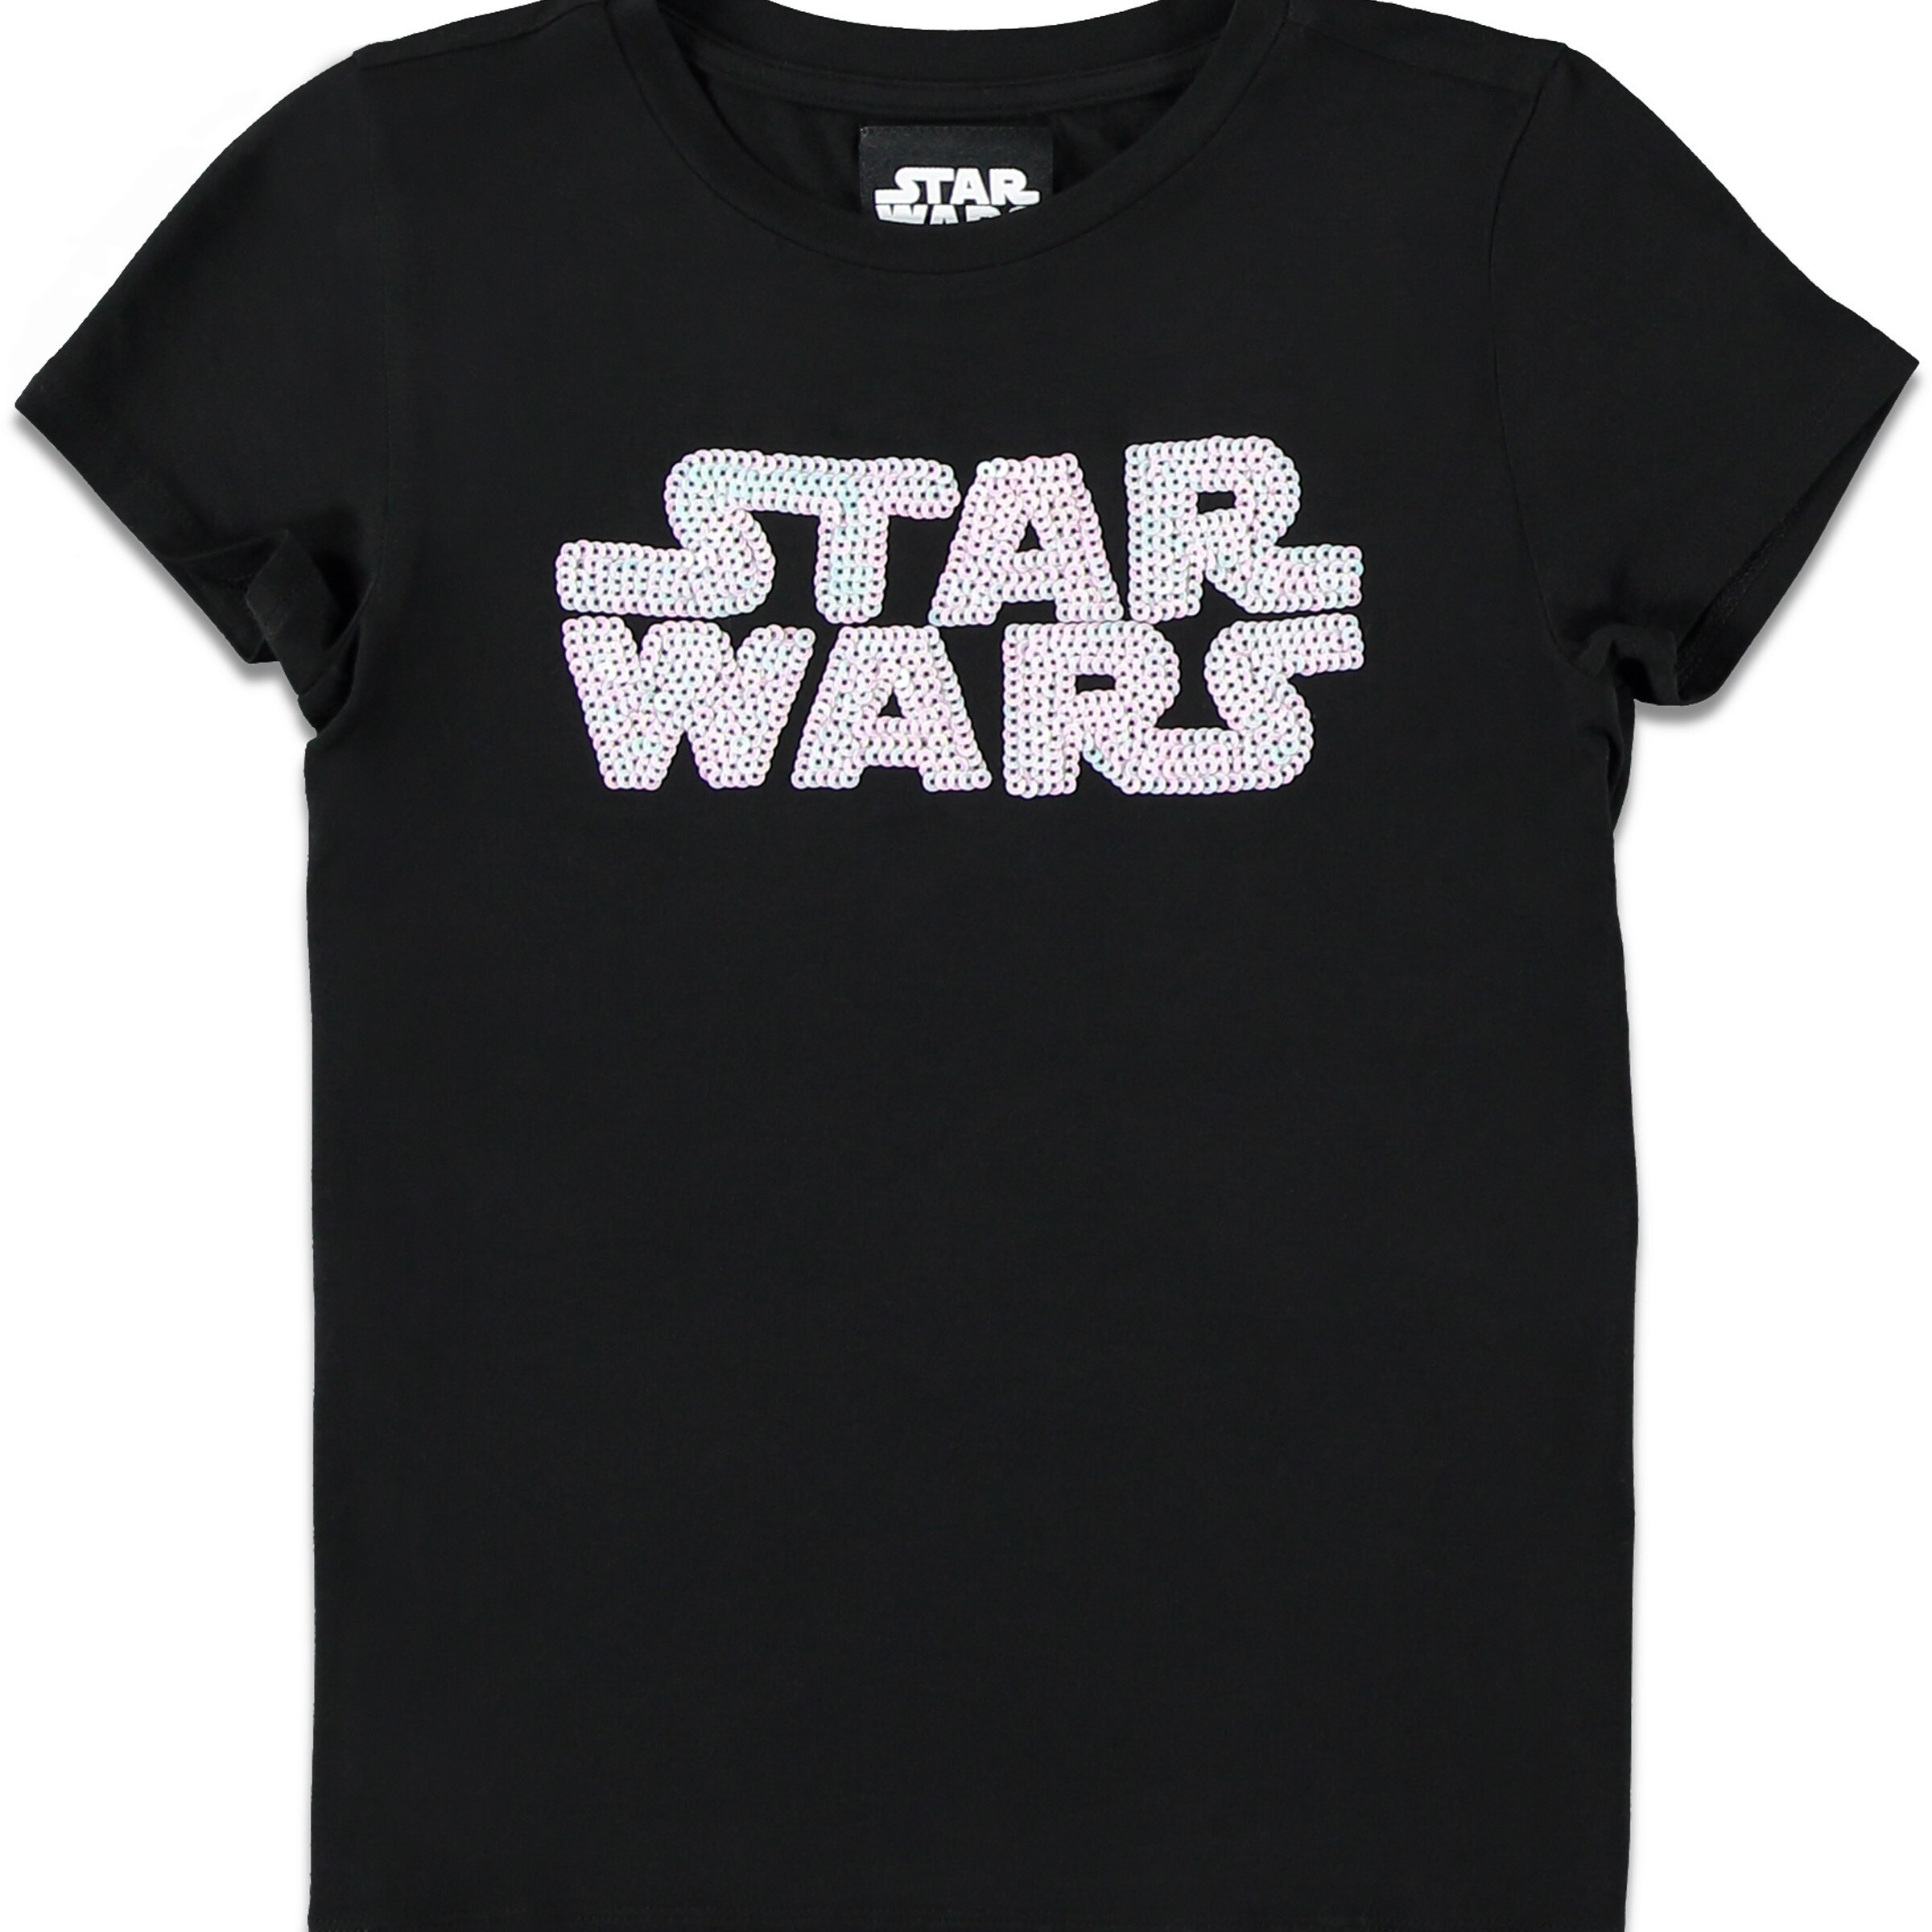 Forever 21 Feels the Force with New Star Wars Line